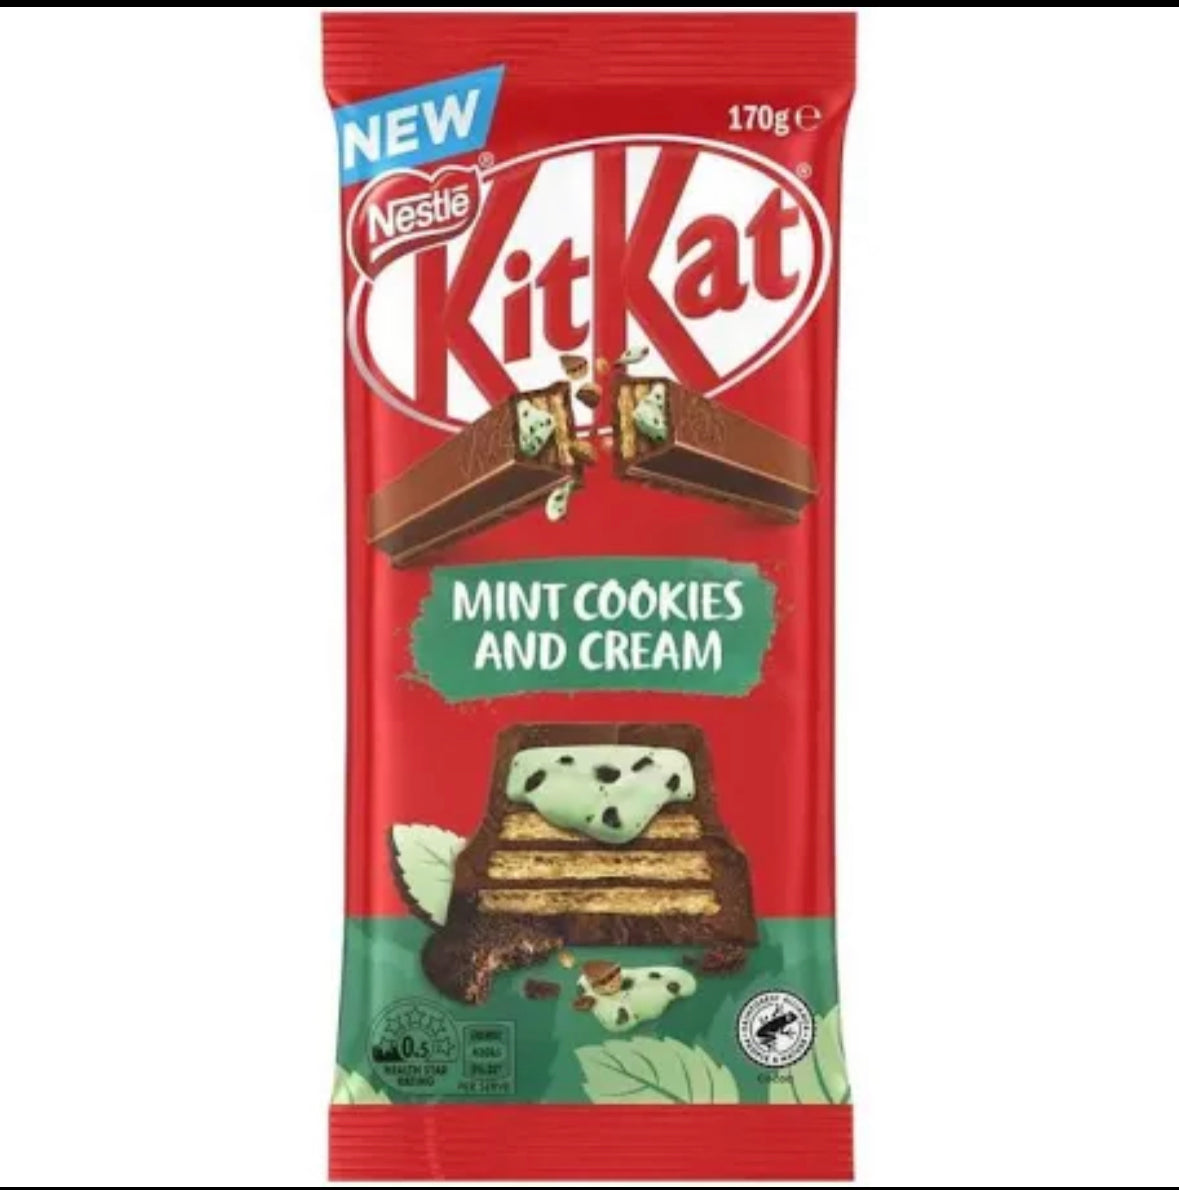 KitKat Mint Cookies and Cream